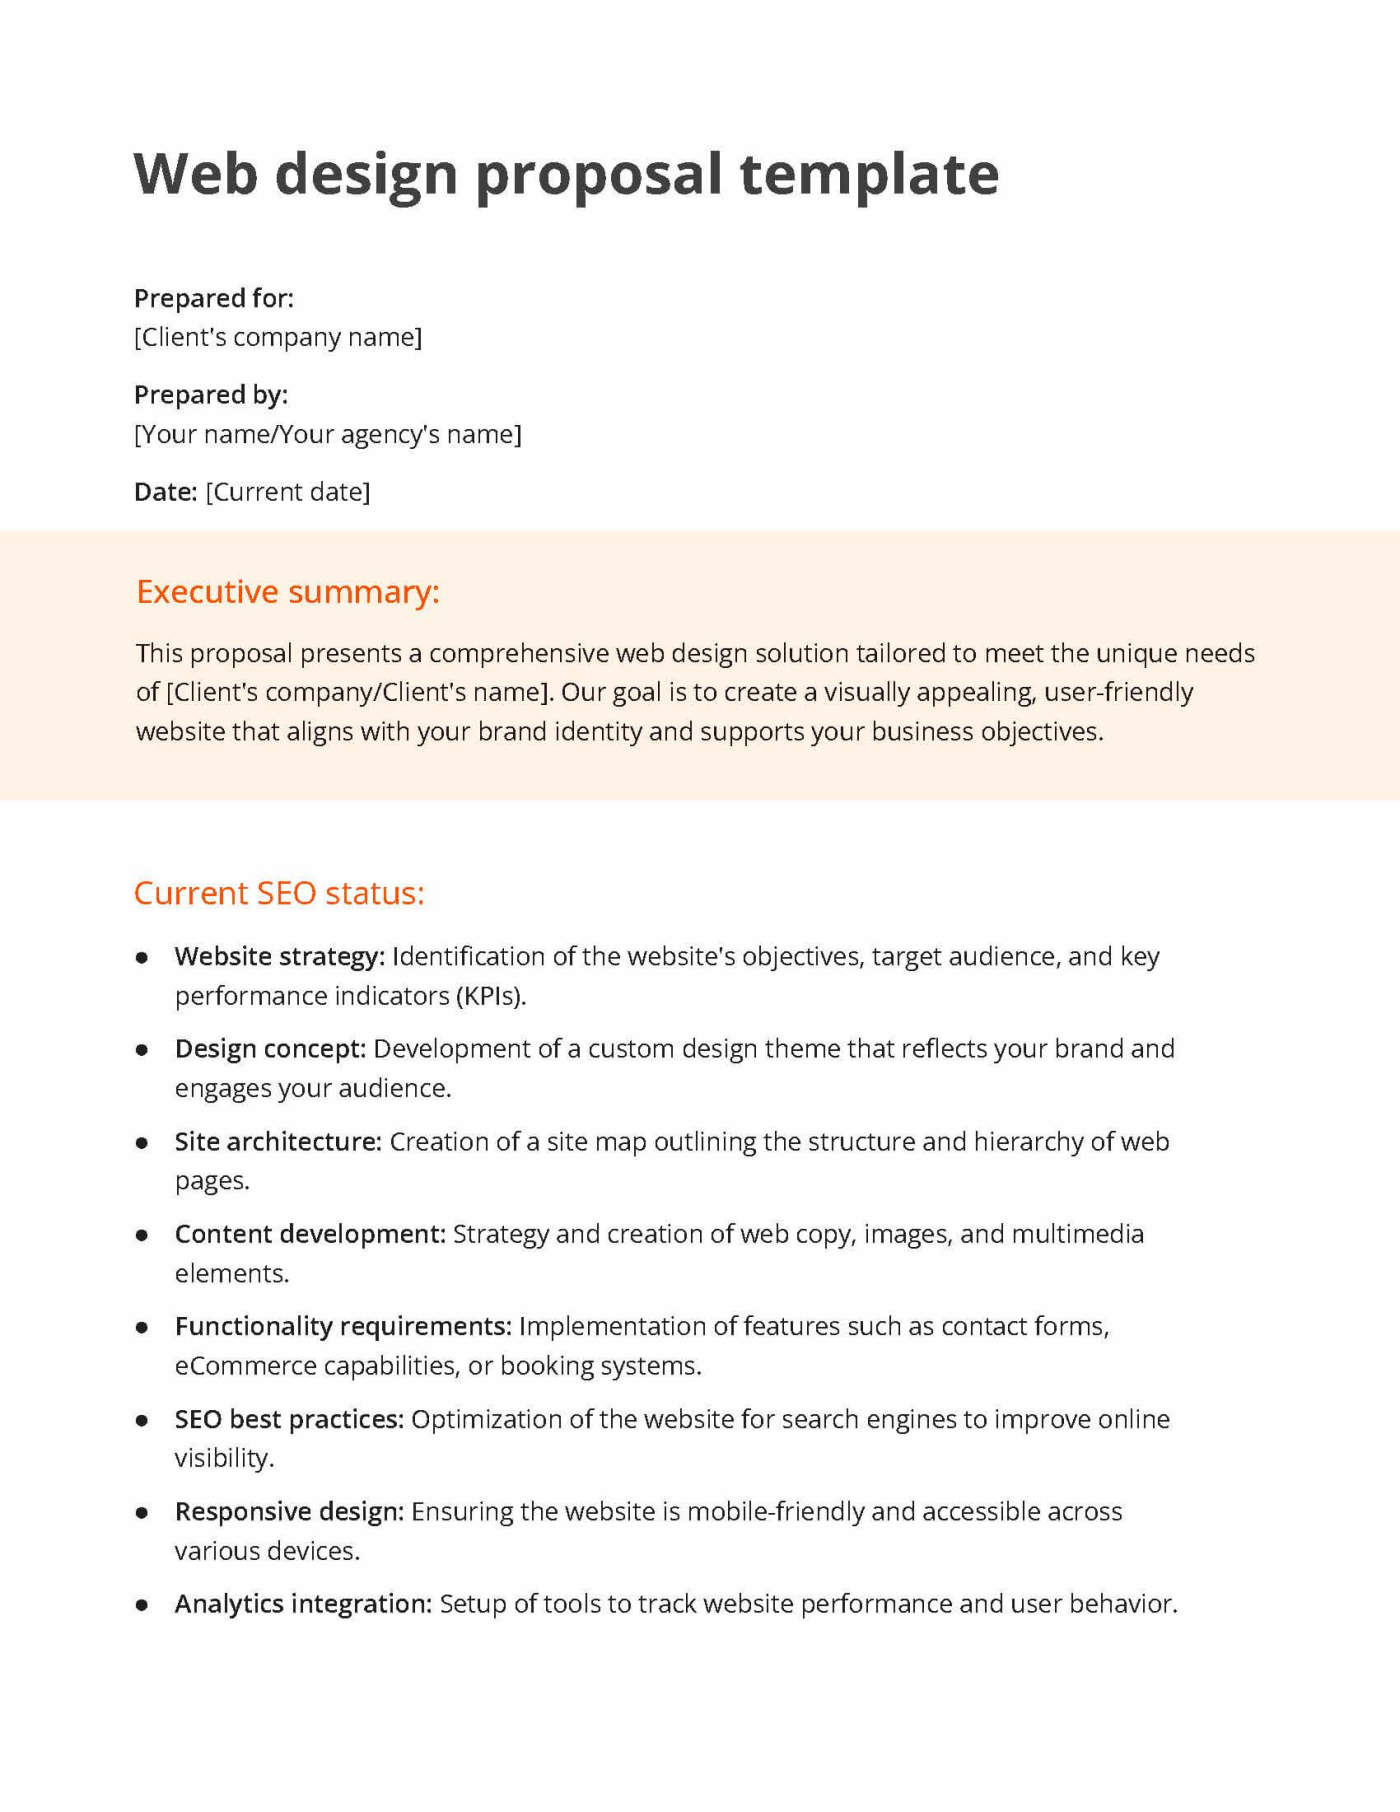 White and orange web design proposal template including a section for the executive summary and current SEO status